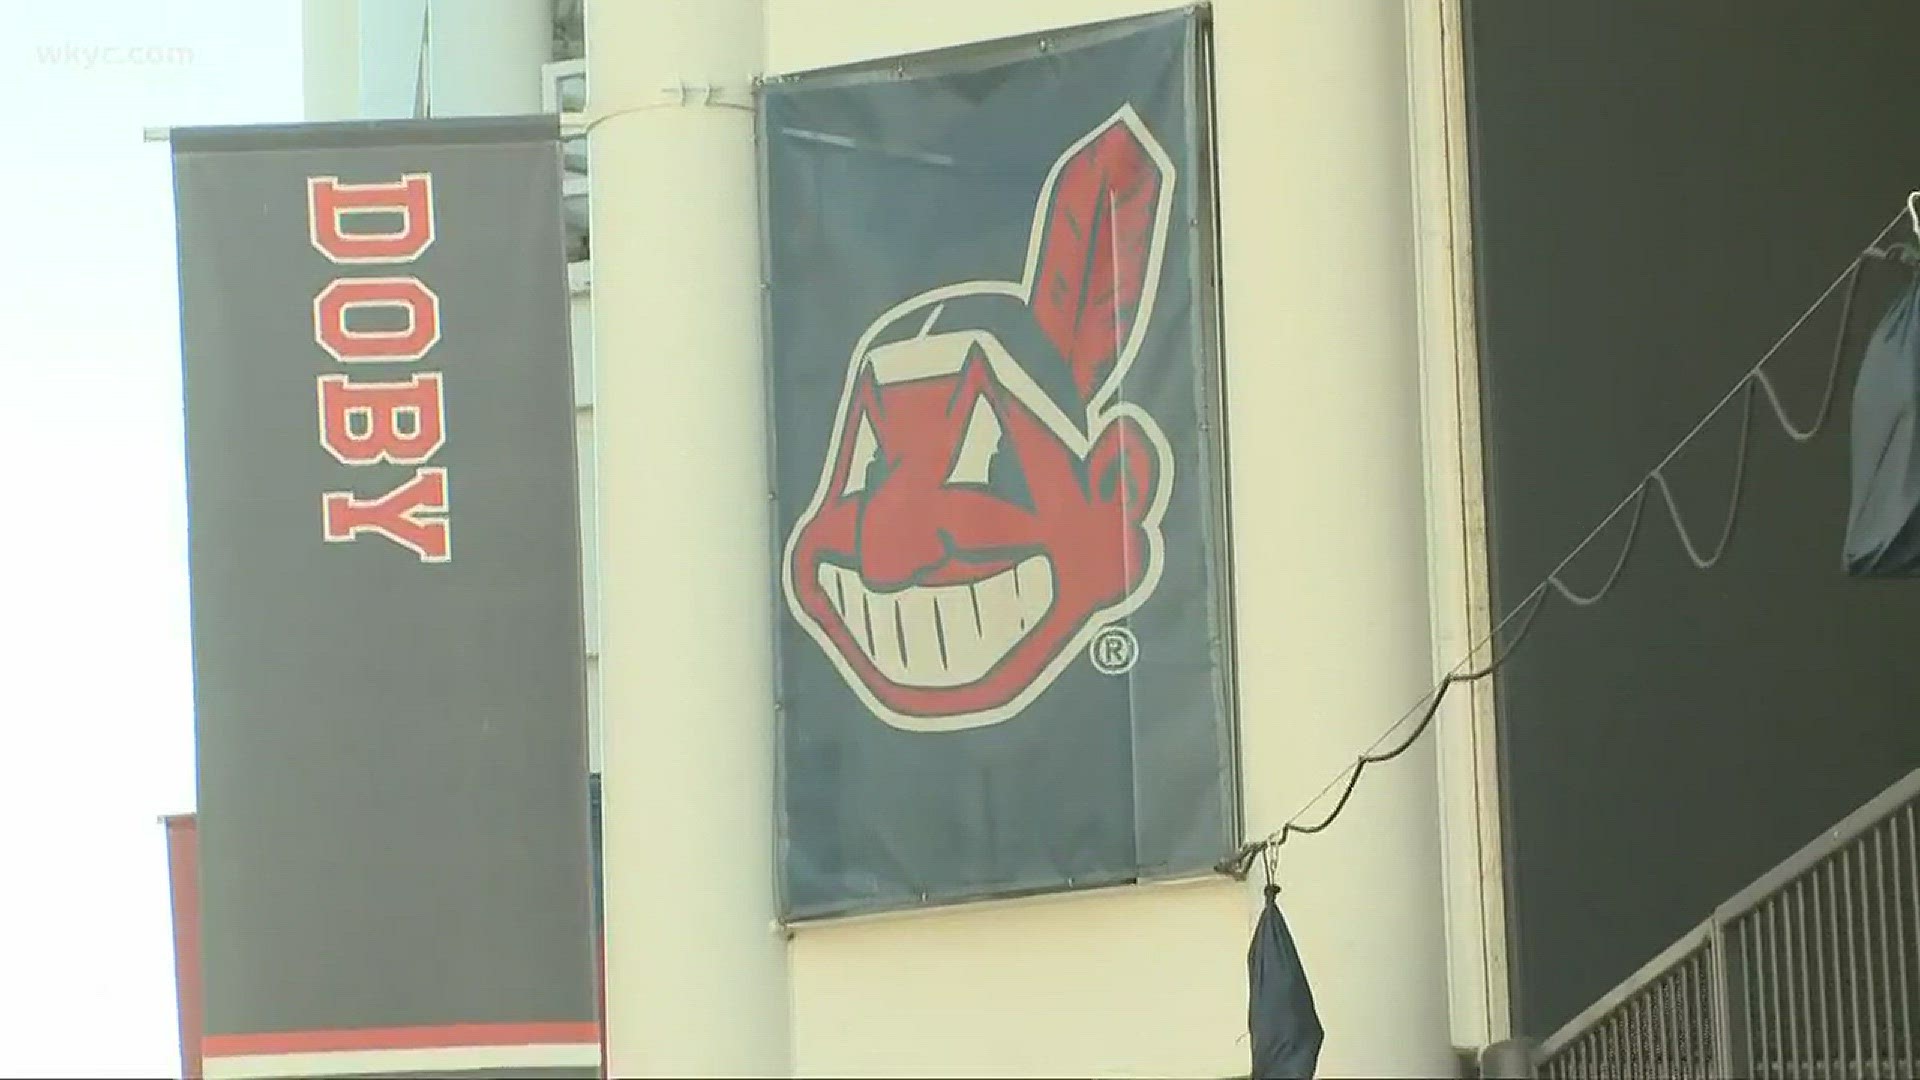 Fans react to news that Cleveland Indians will no longer wear Chief Wahoo  logo in 2019